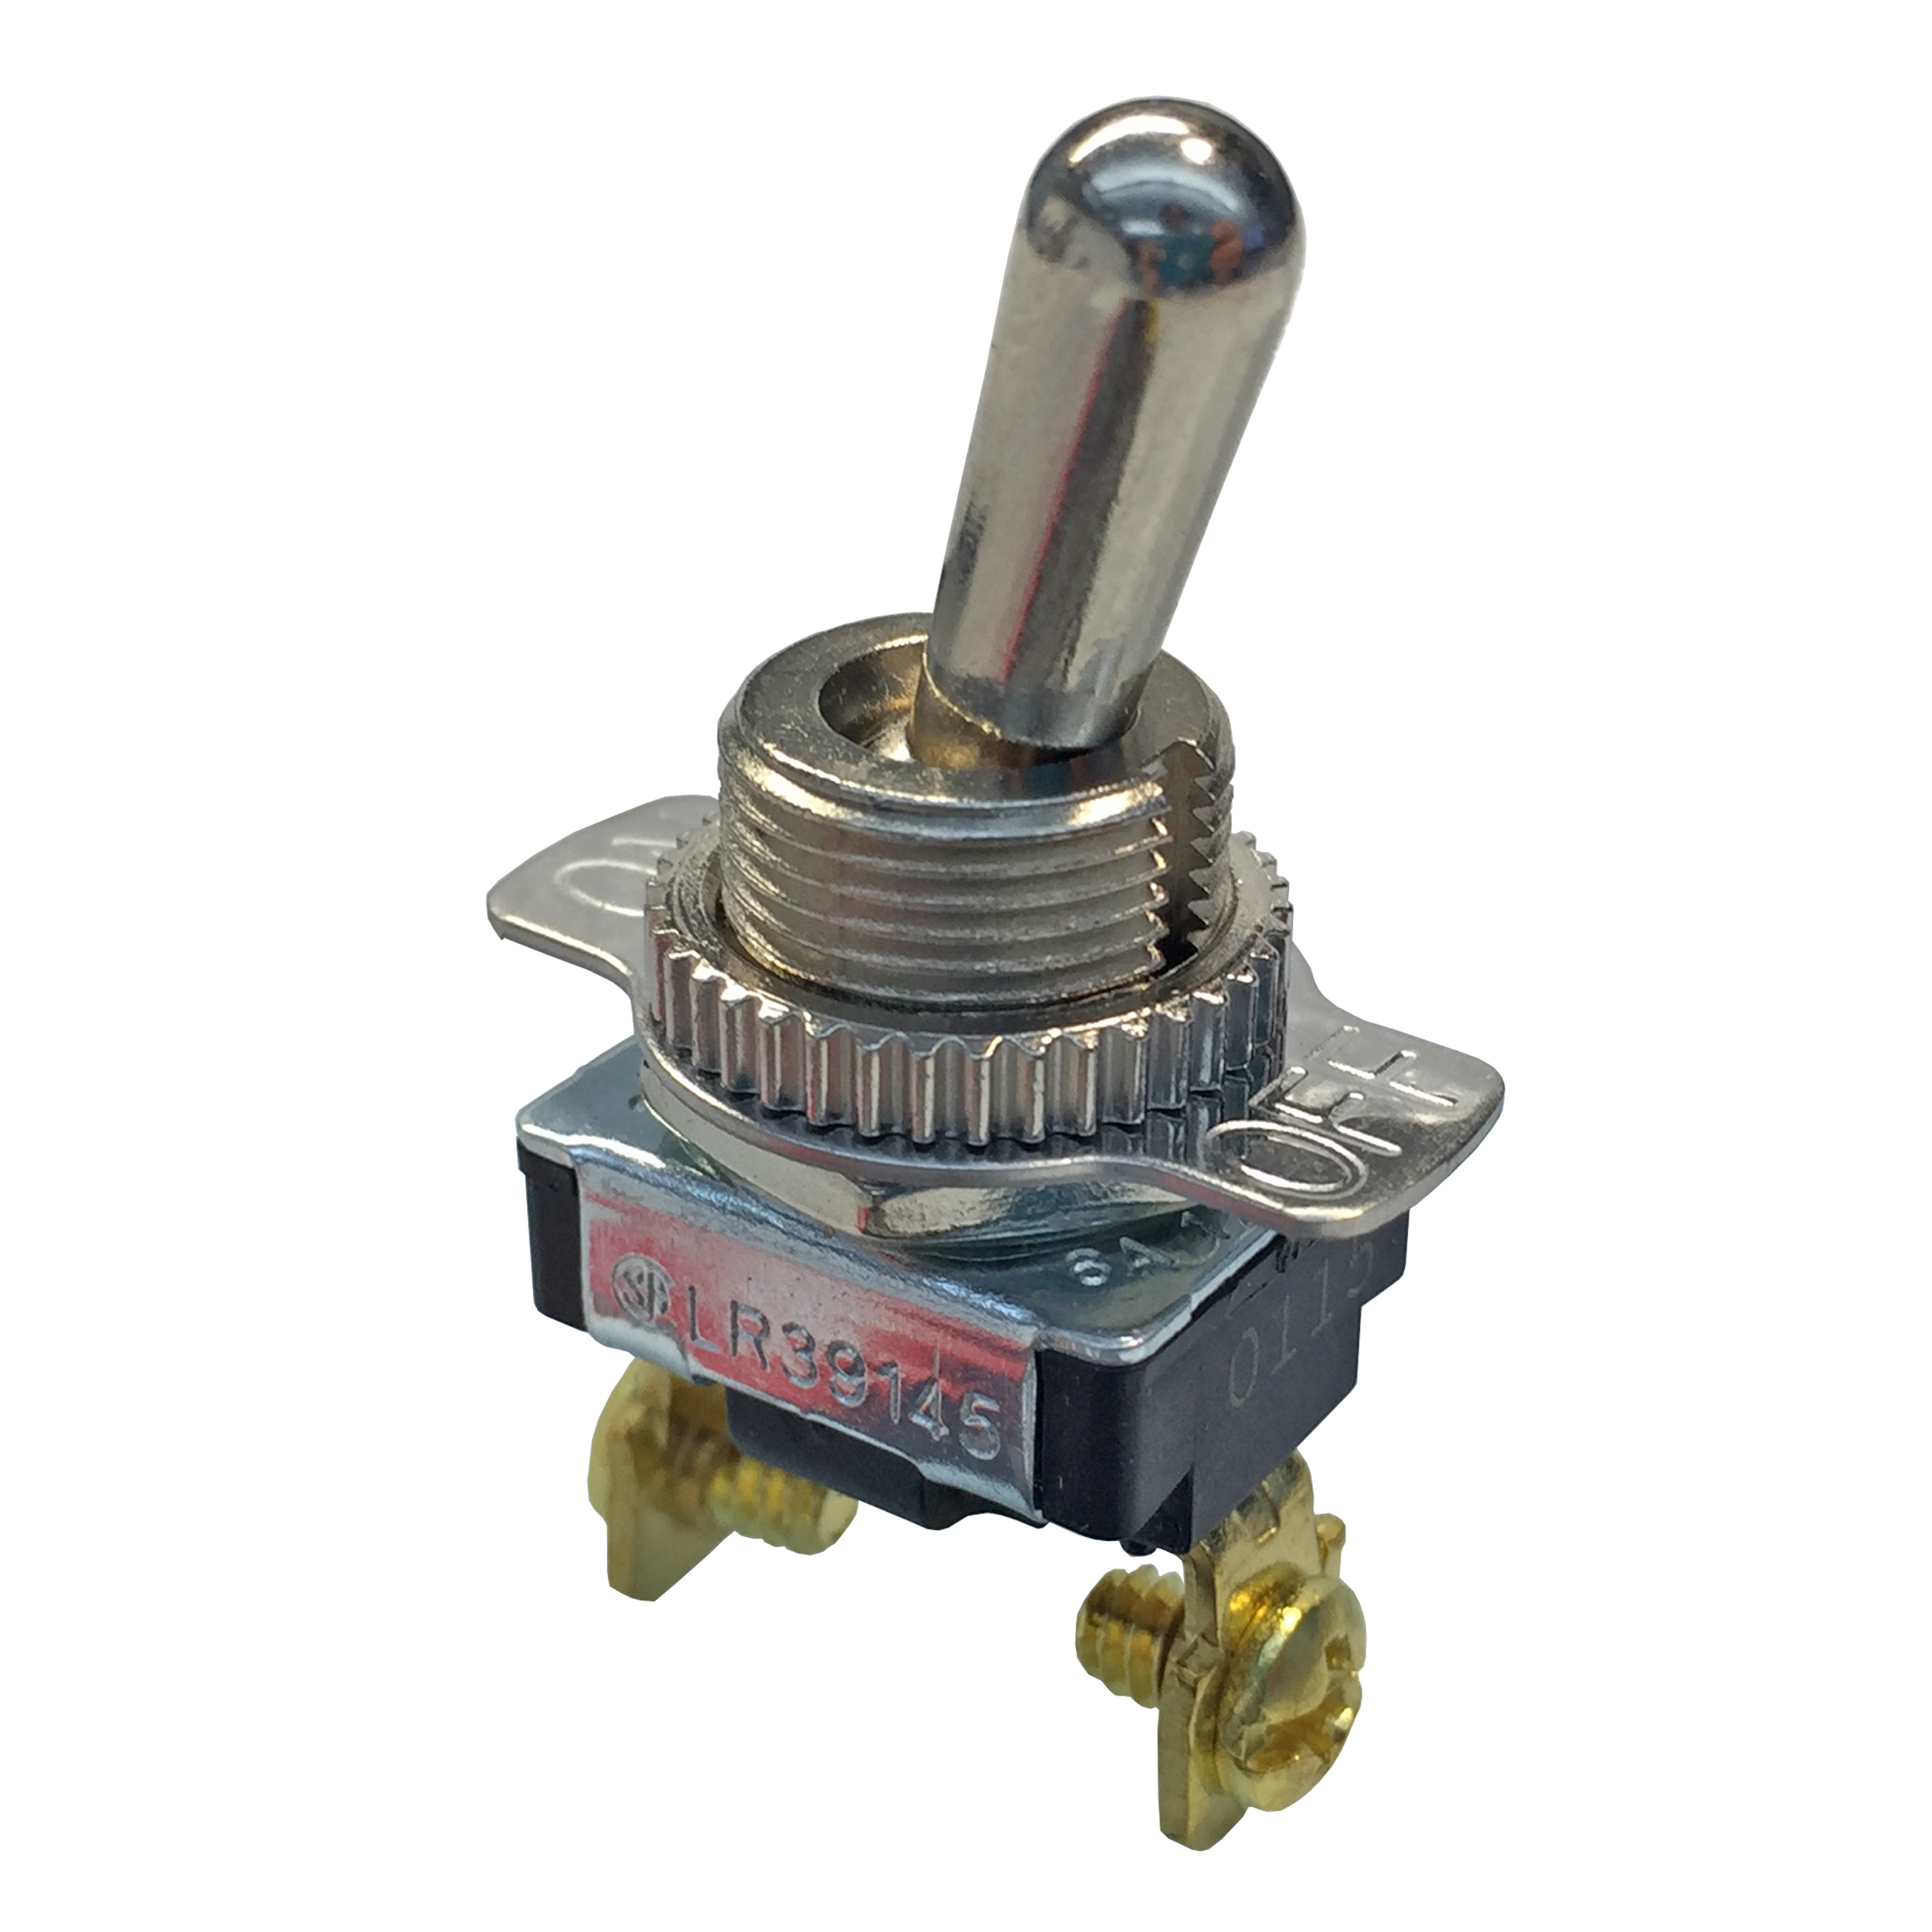 GSW-17 Toggle Switch, 120/240 VAC, SPST, Screw Terminal, Steel Housing Material